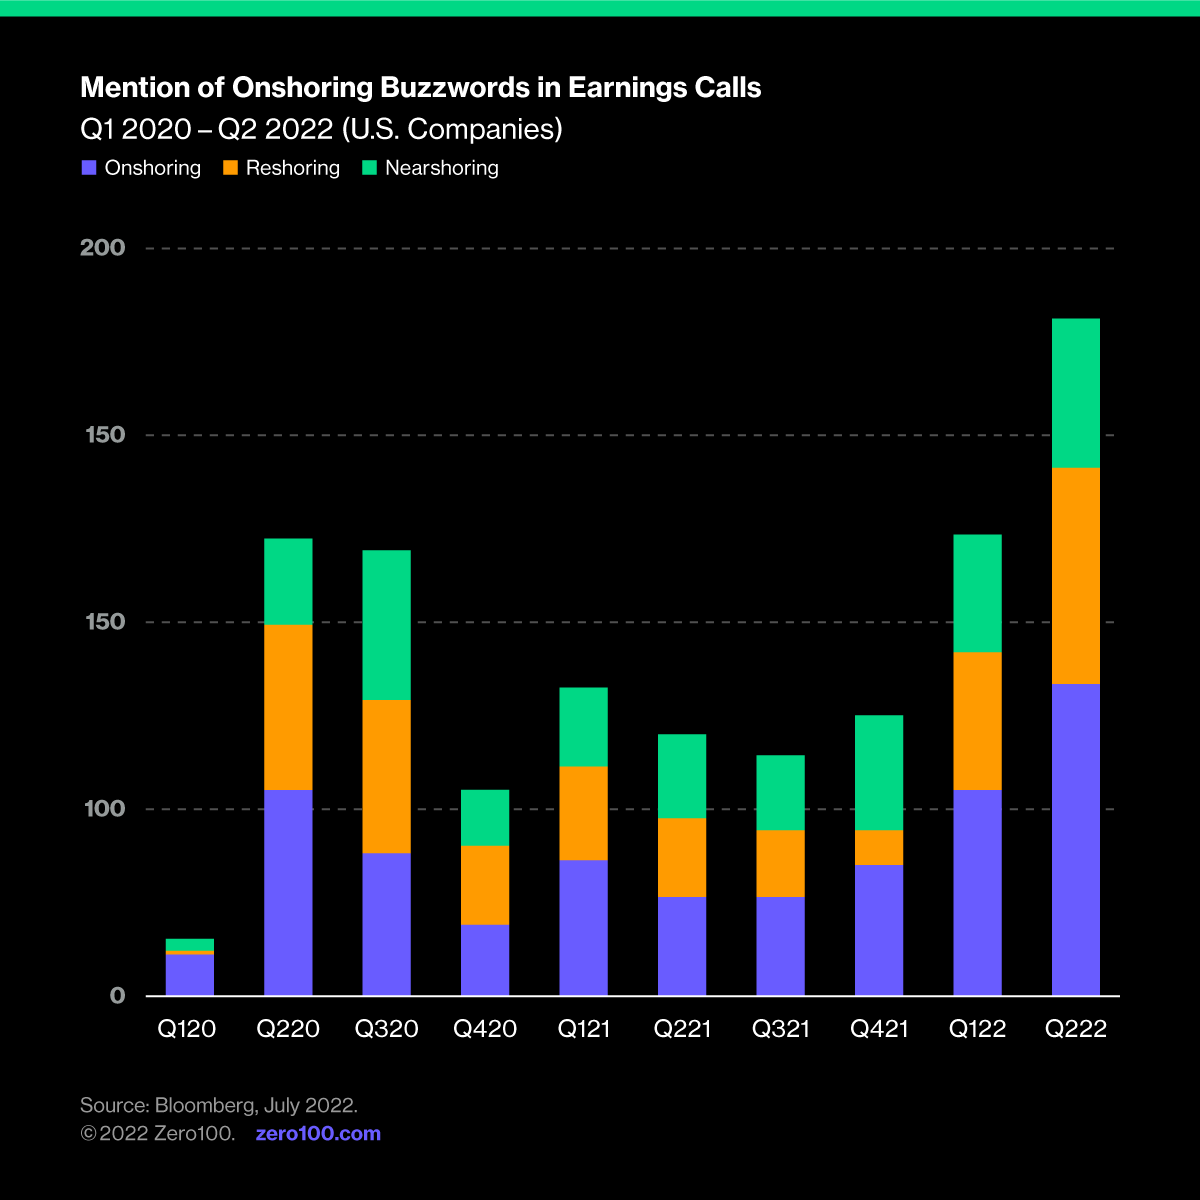 Graph depicting the mention of onshoring buzzwords in earnings calls. Source: Bloomberg, July 2022.